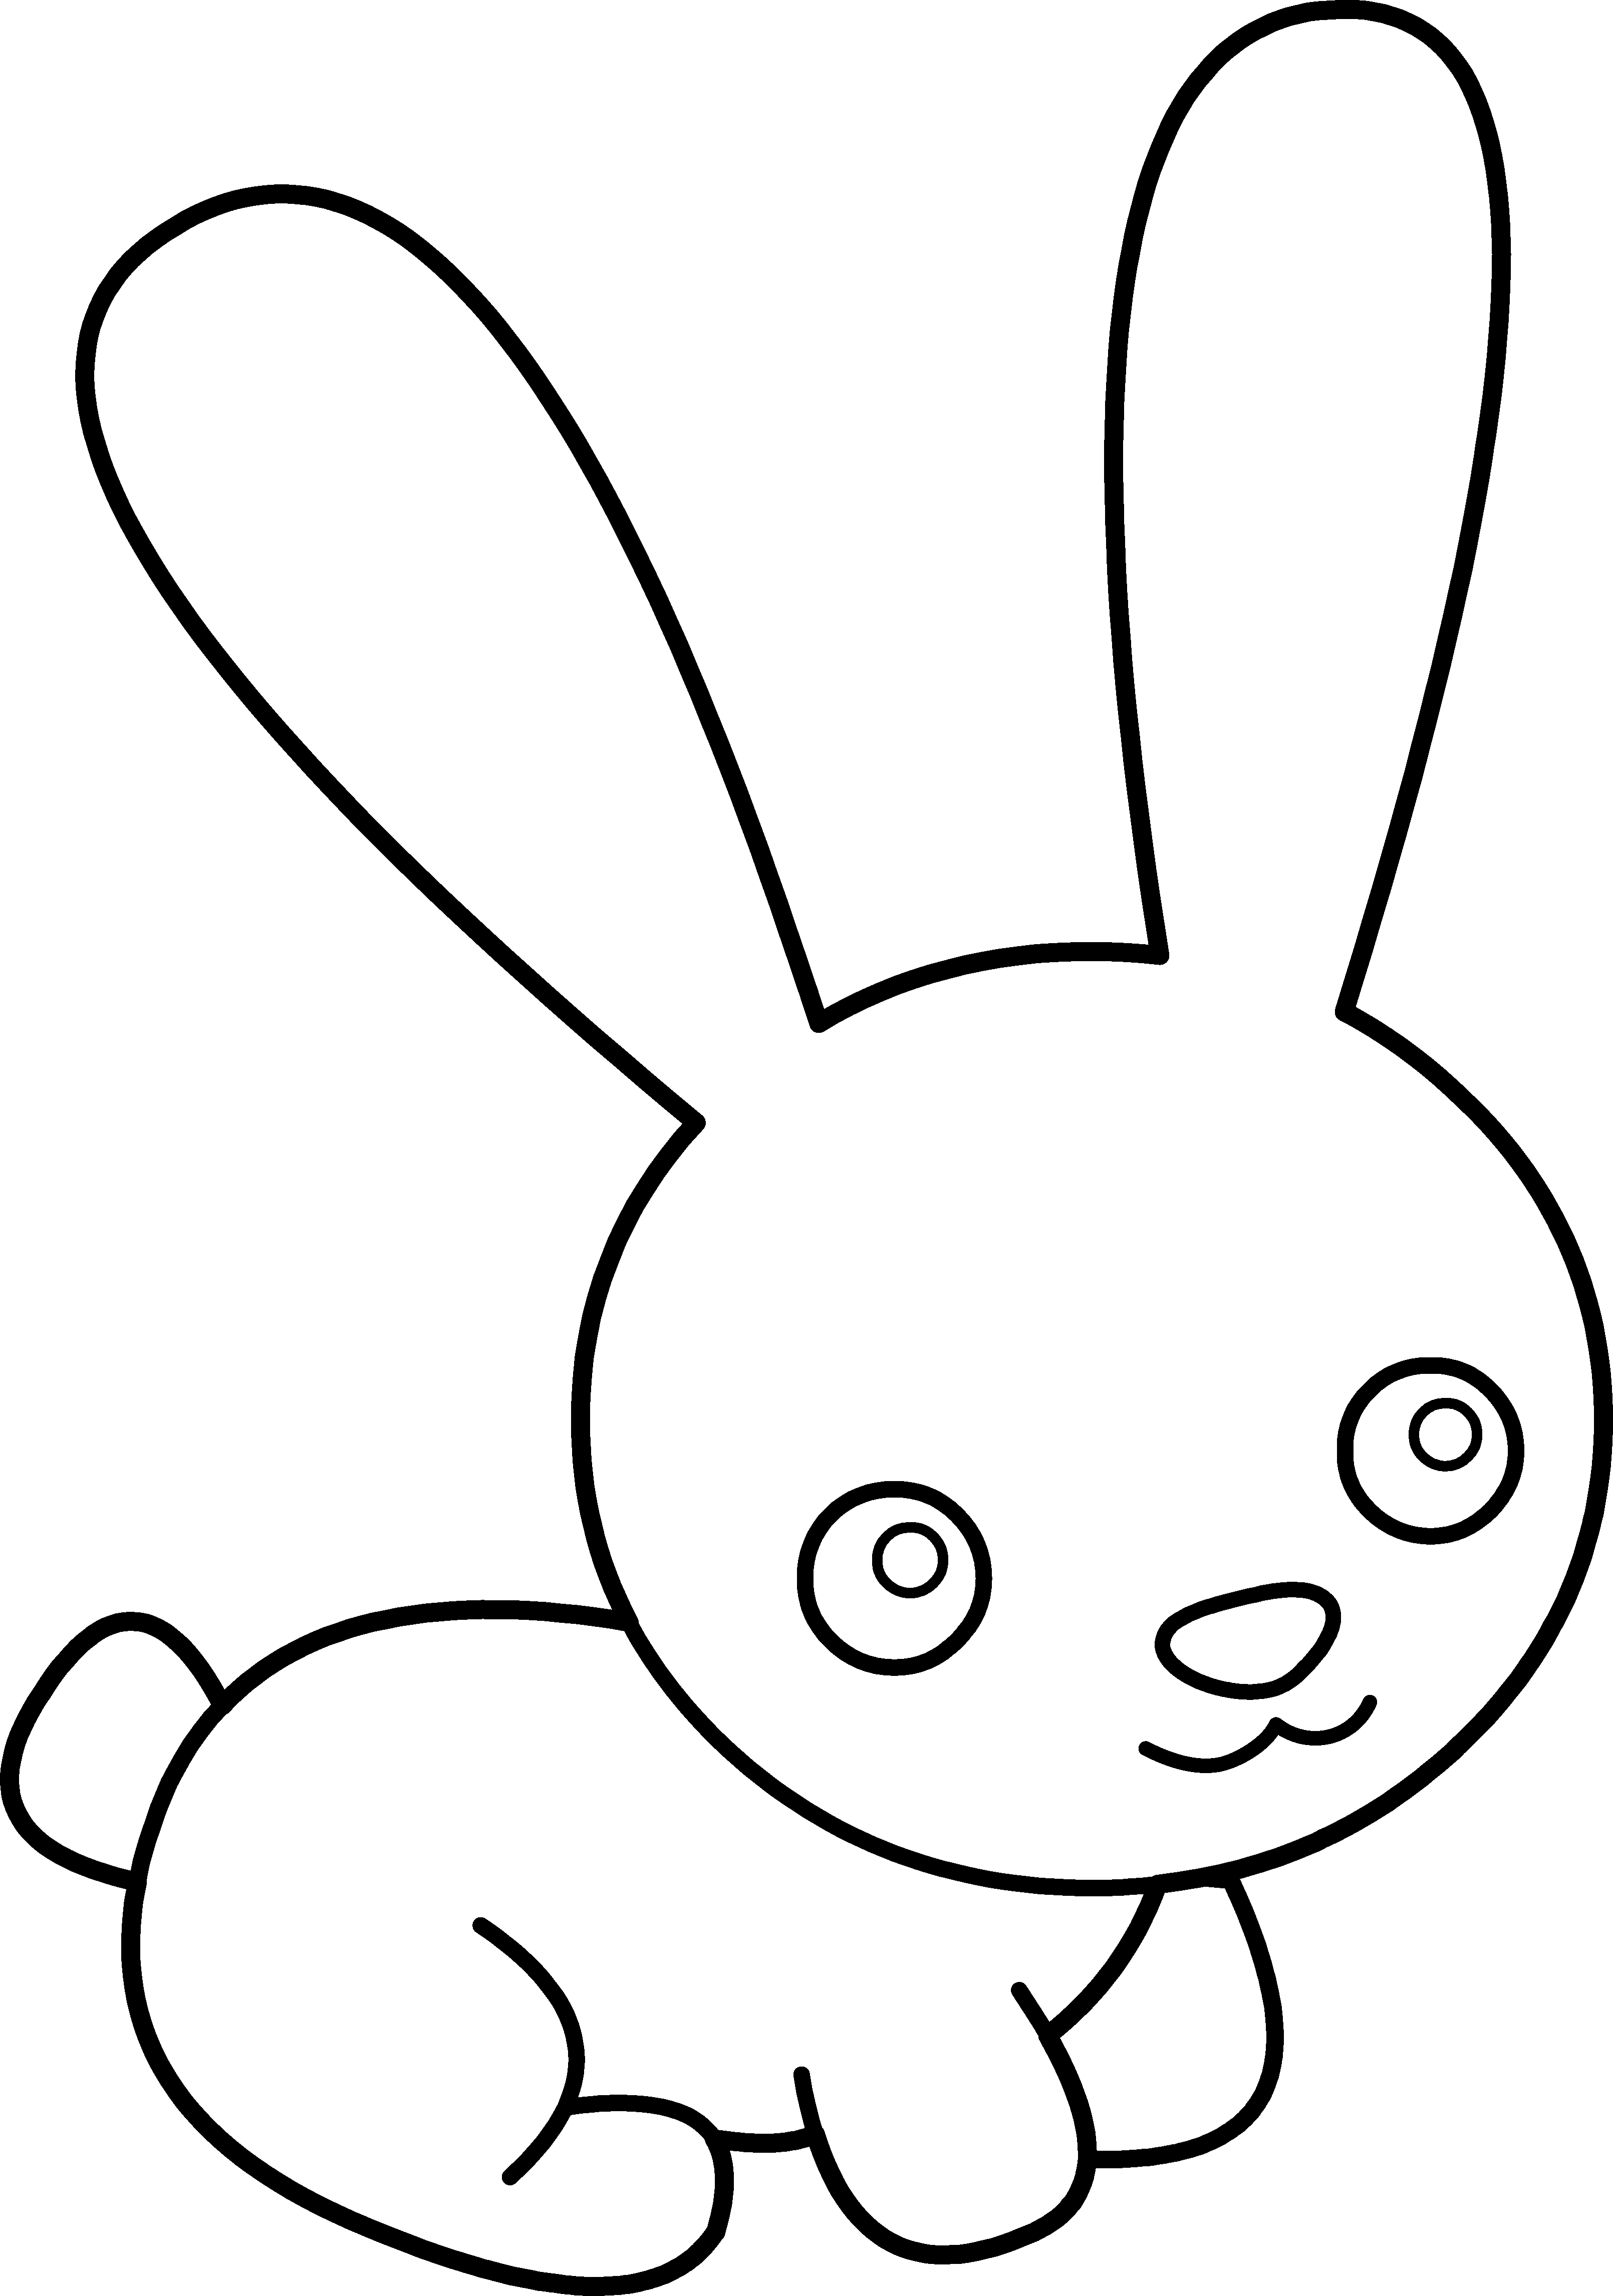 Black And White Bunnies Clip Art Images  Pictures - Becuo